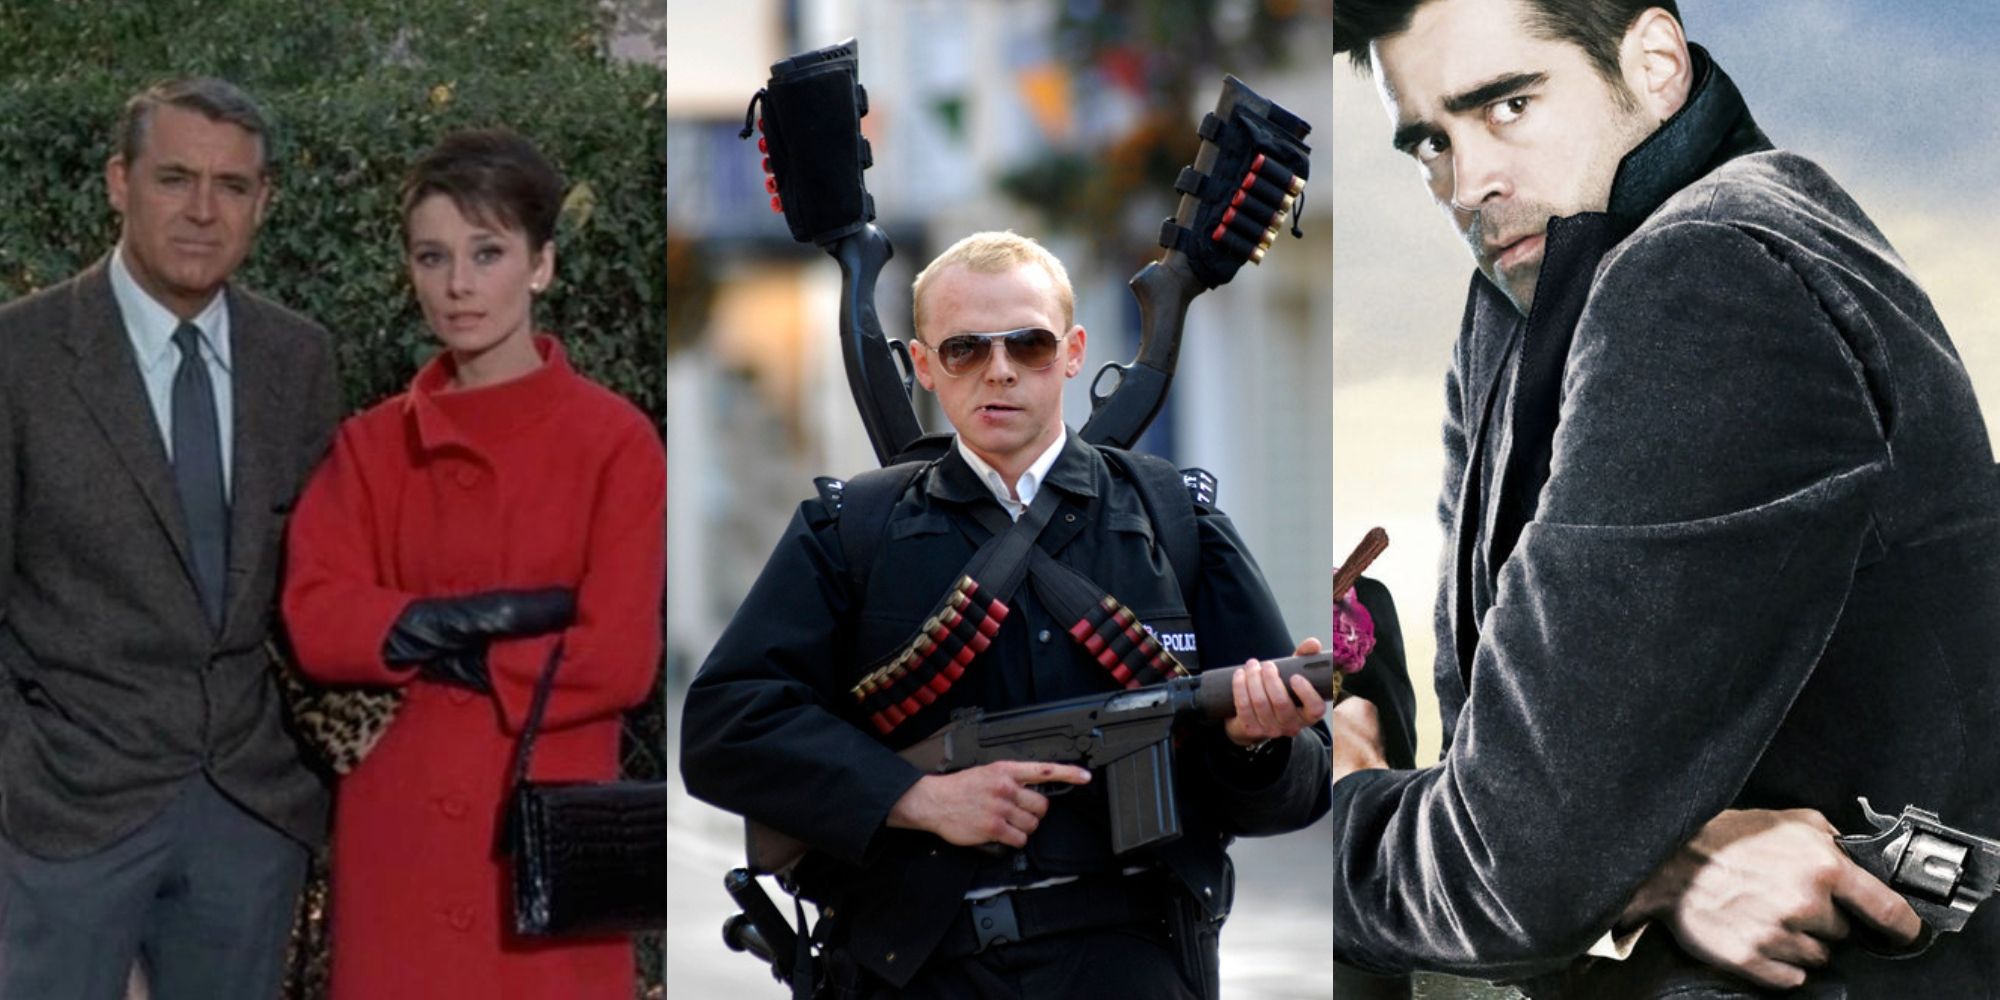 Peter and Regina in Charade, Nicholas in Hot Fuzz, Harry, Ray, and Ken in In Bruges